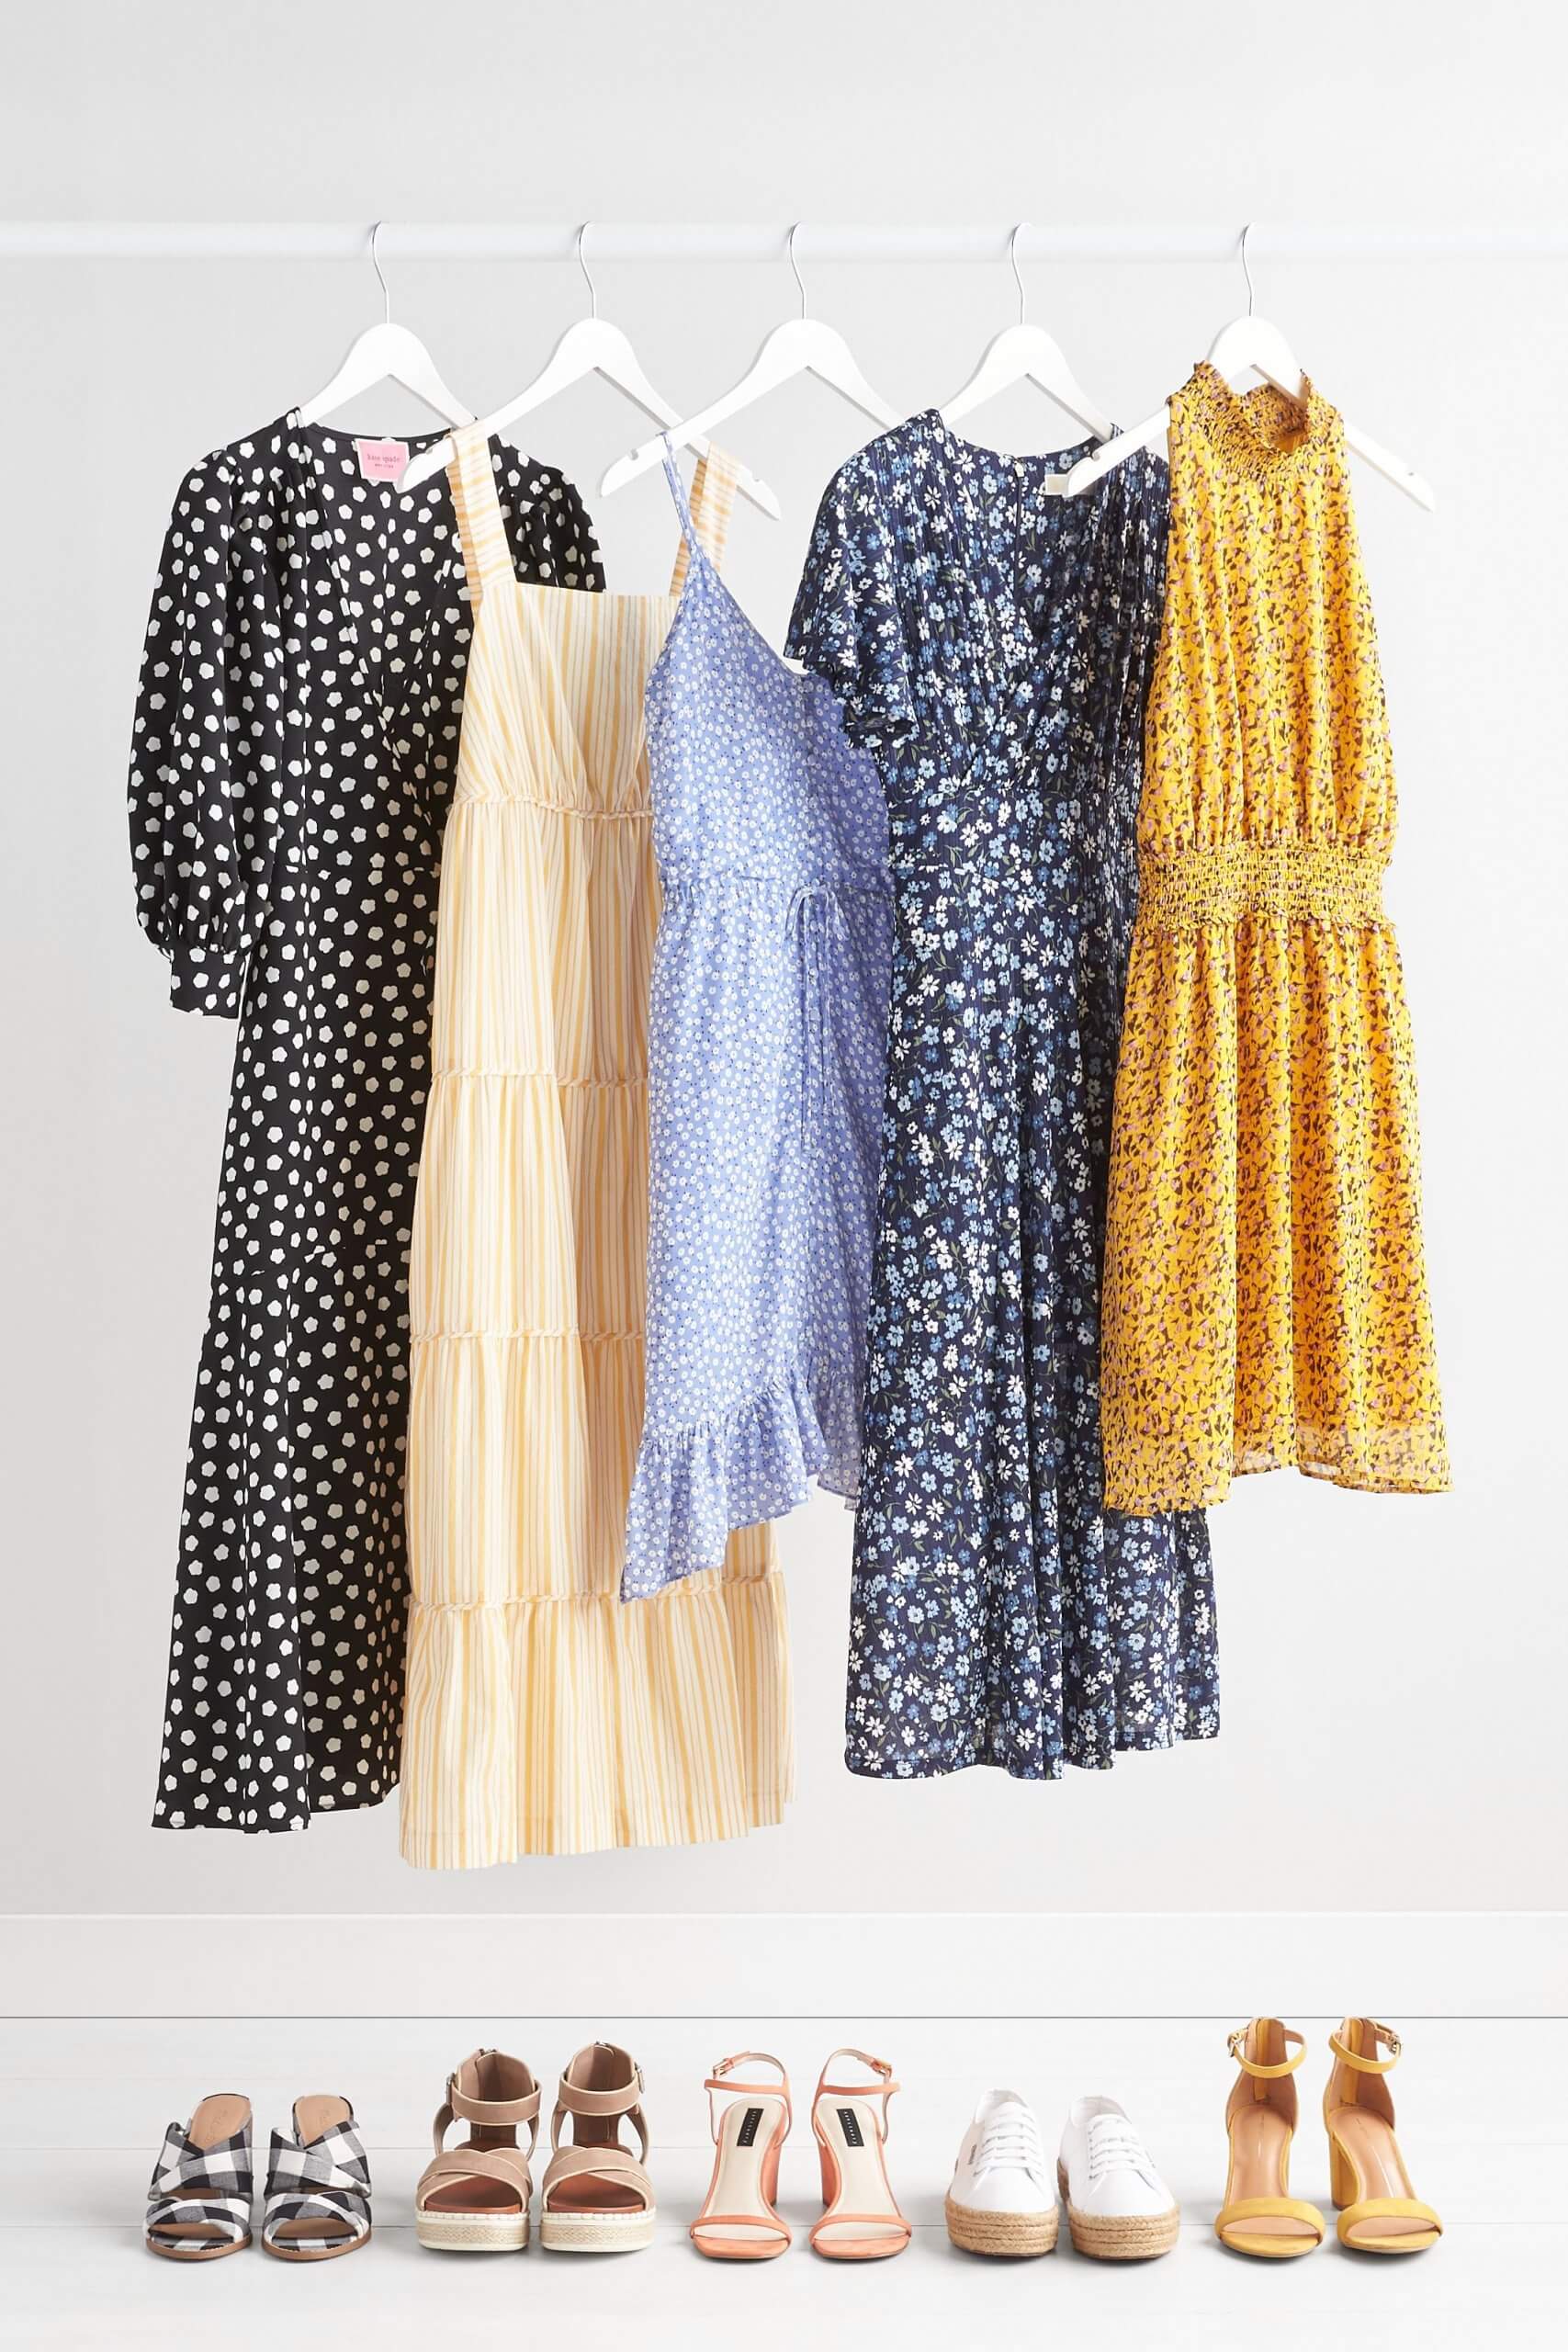 Stitch Fix Women’s dresses hanging on clothing rack featuring mini, midi and maxi styles with various shoes.